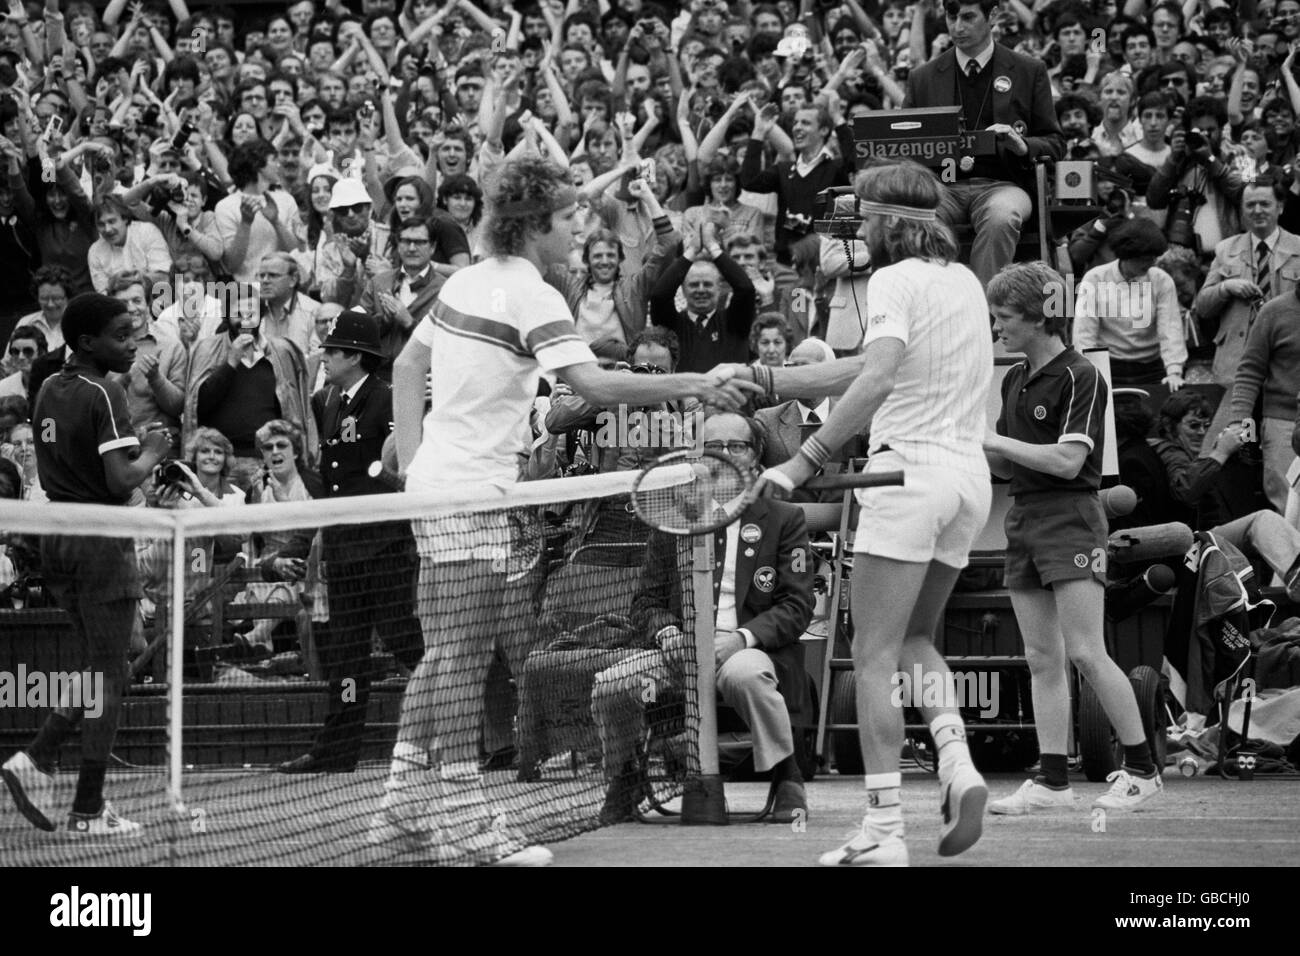 Bjorn Borg congratulates the new champion John McEnroe with the traditional handshake at the nets after the final on Centre Court. McEnroe won 4-6, 7-6, 7-6, 6-4. Stock Photo